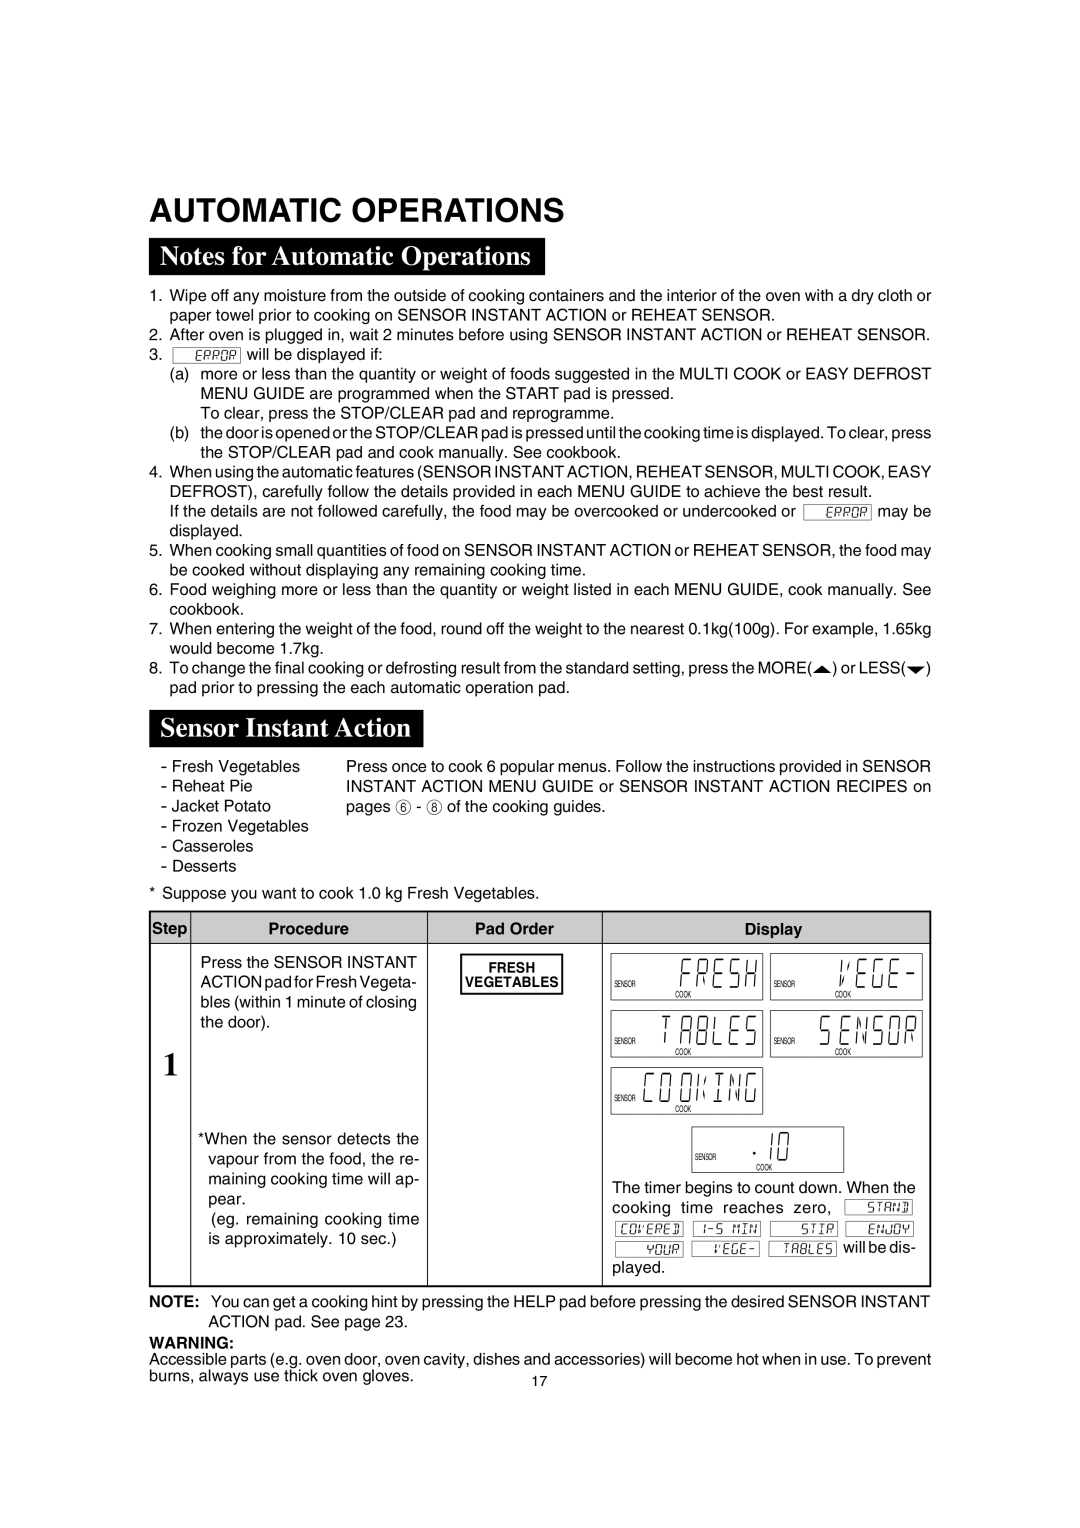 Sharp R-990J(S), R-990K(S)/(W), R-980J operation manual Notes for Automatic Operations, Sensor Instant Action 